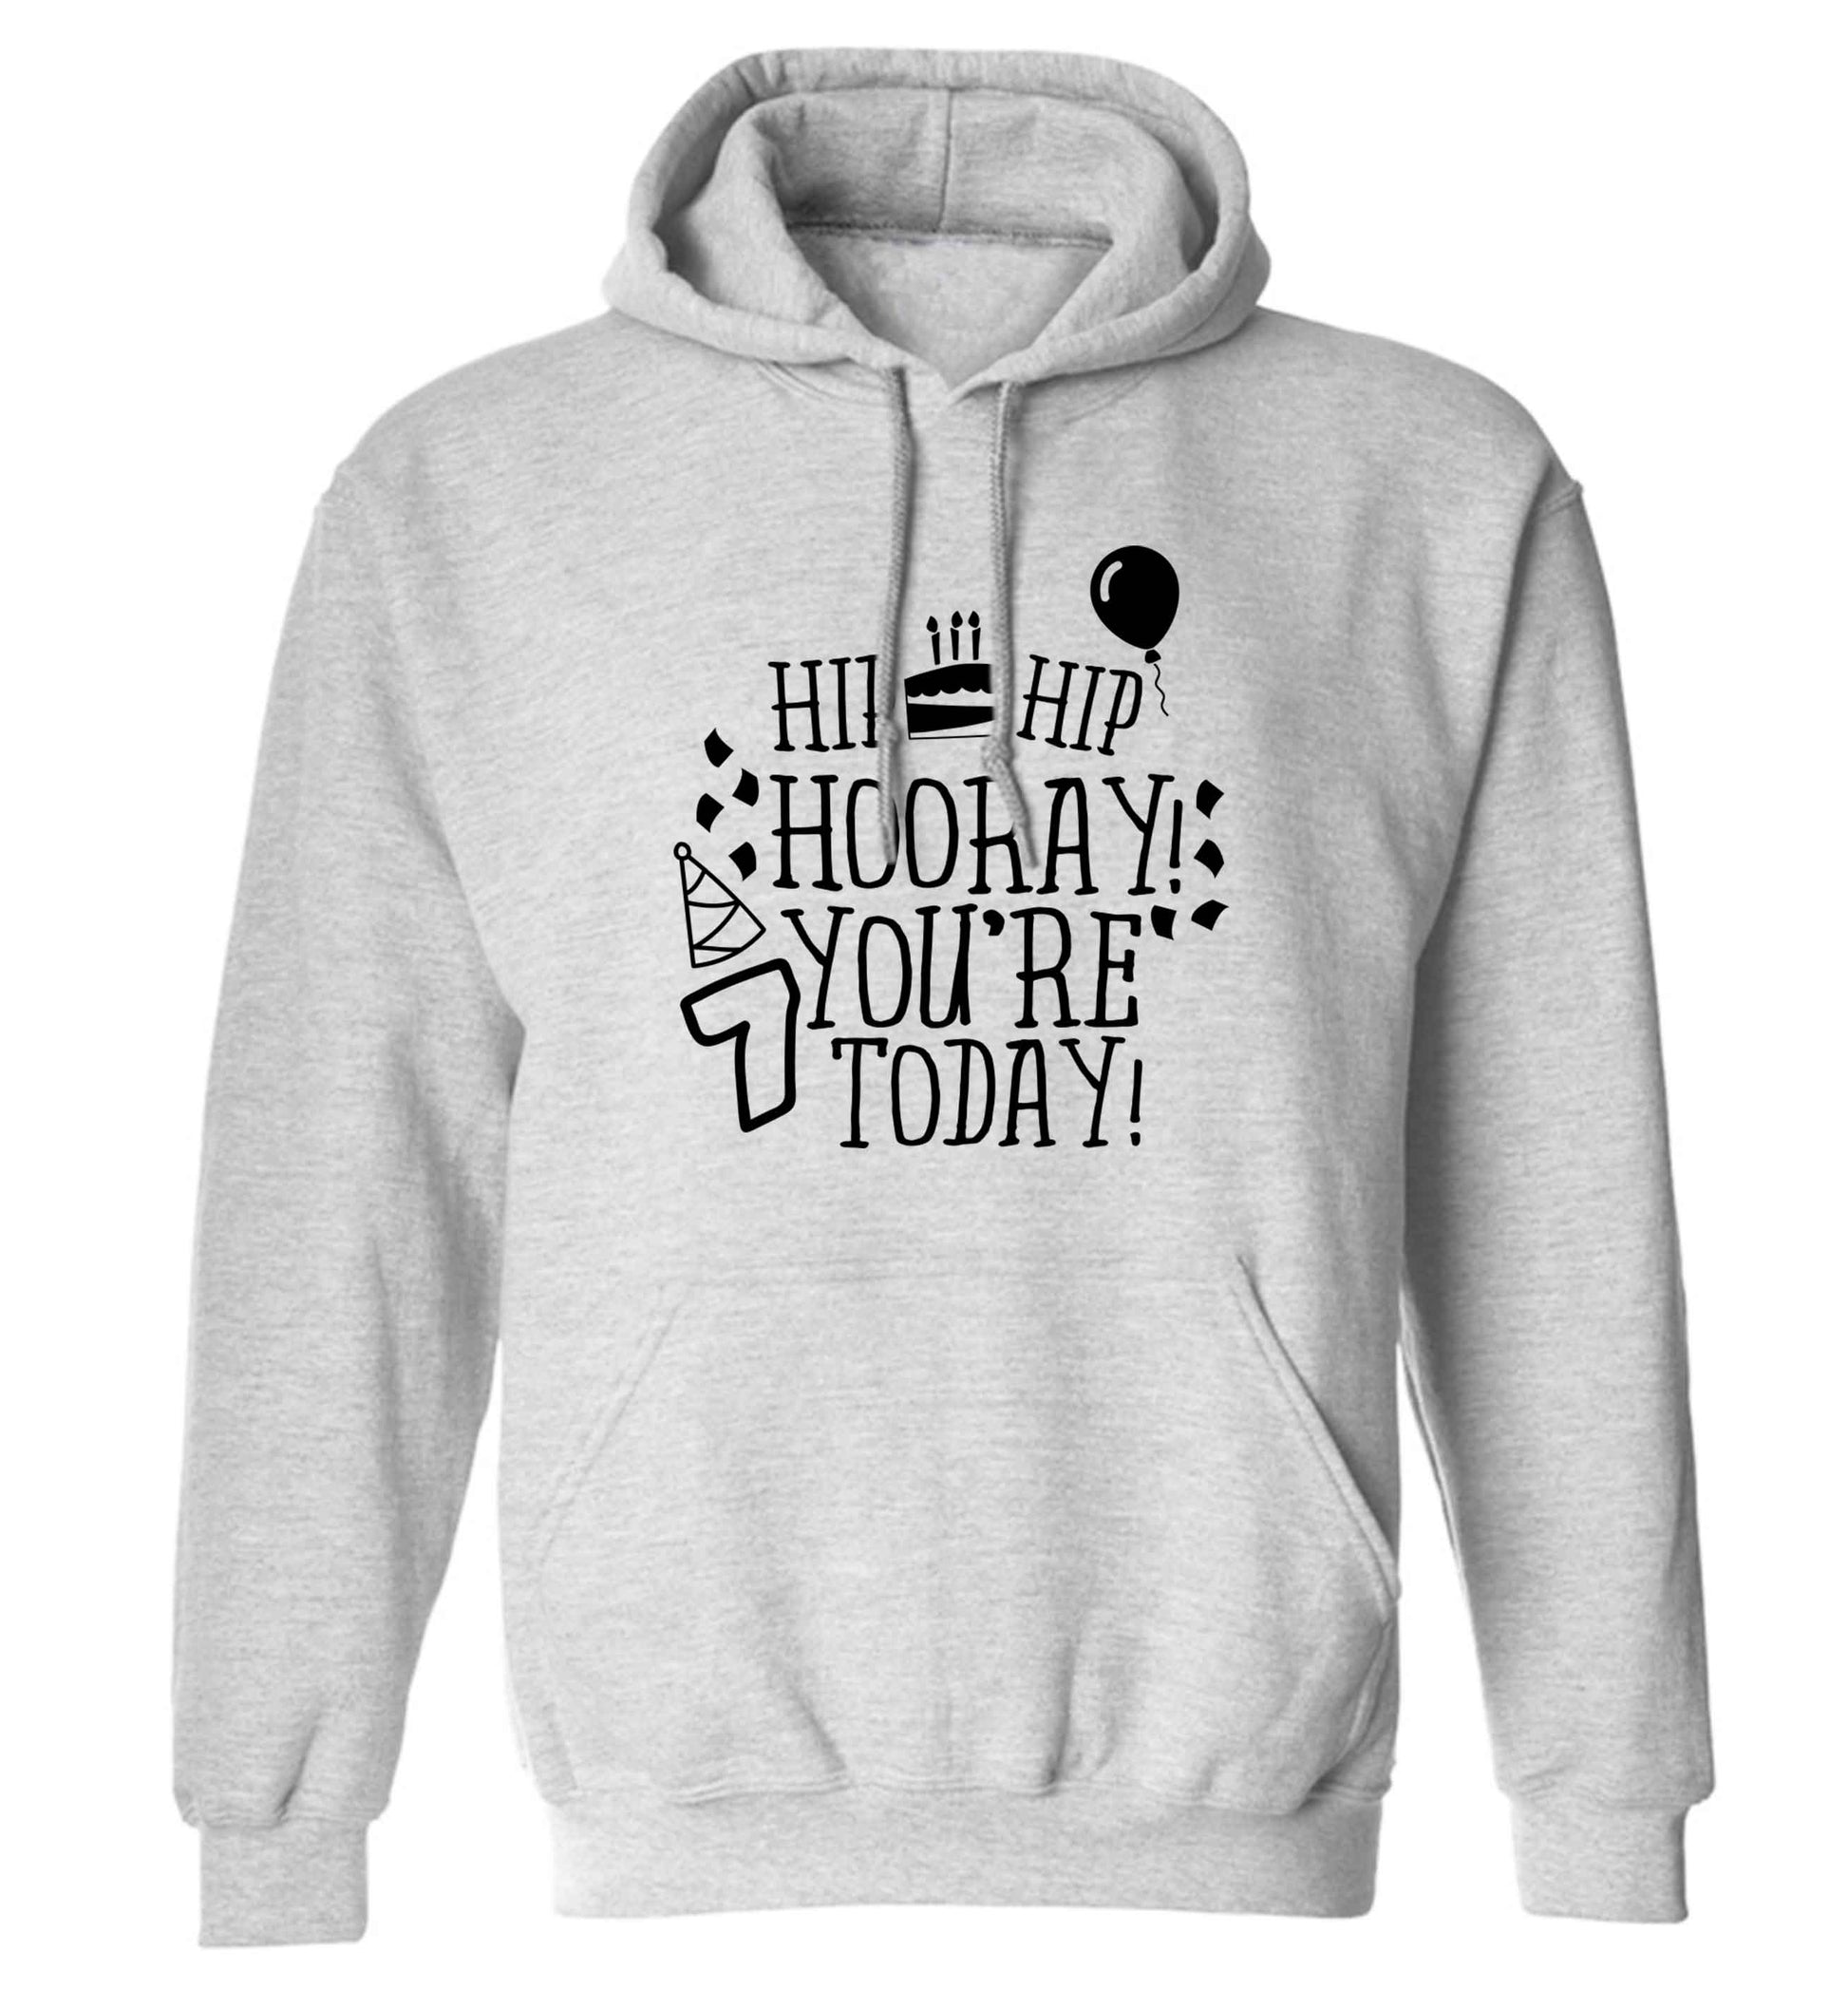 Hip hip hooray you're seven today! adults unisex grey hoodie 2XL